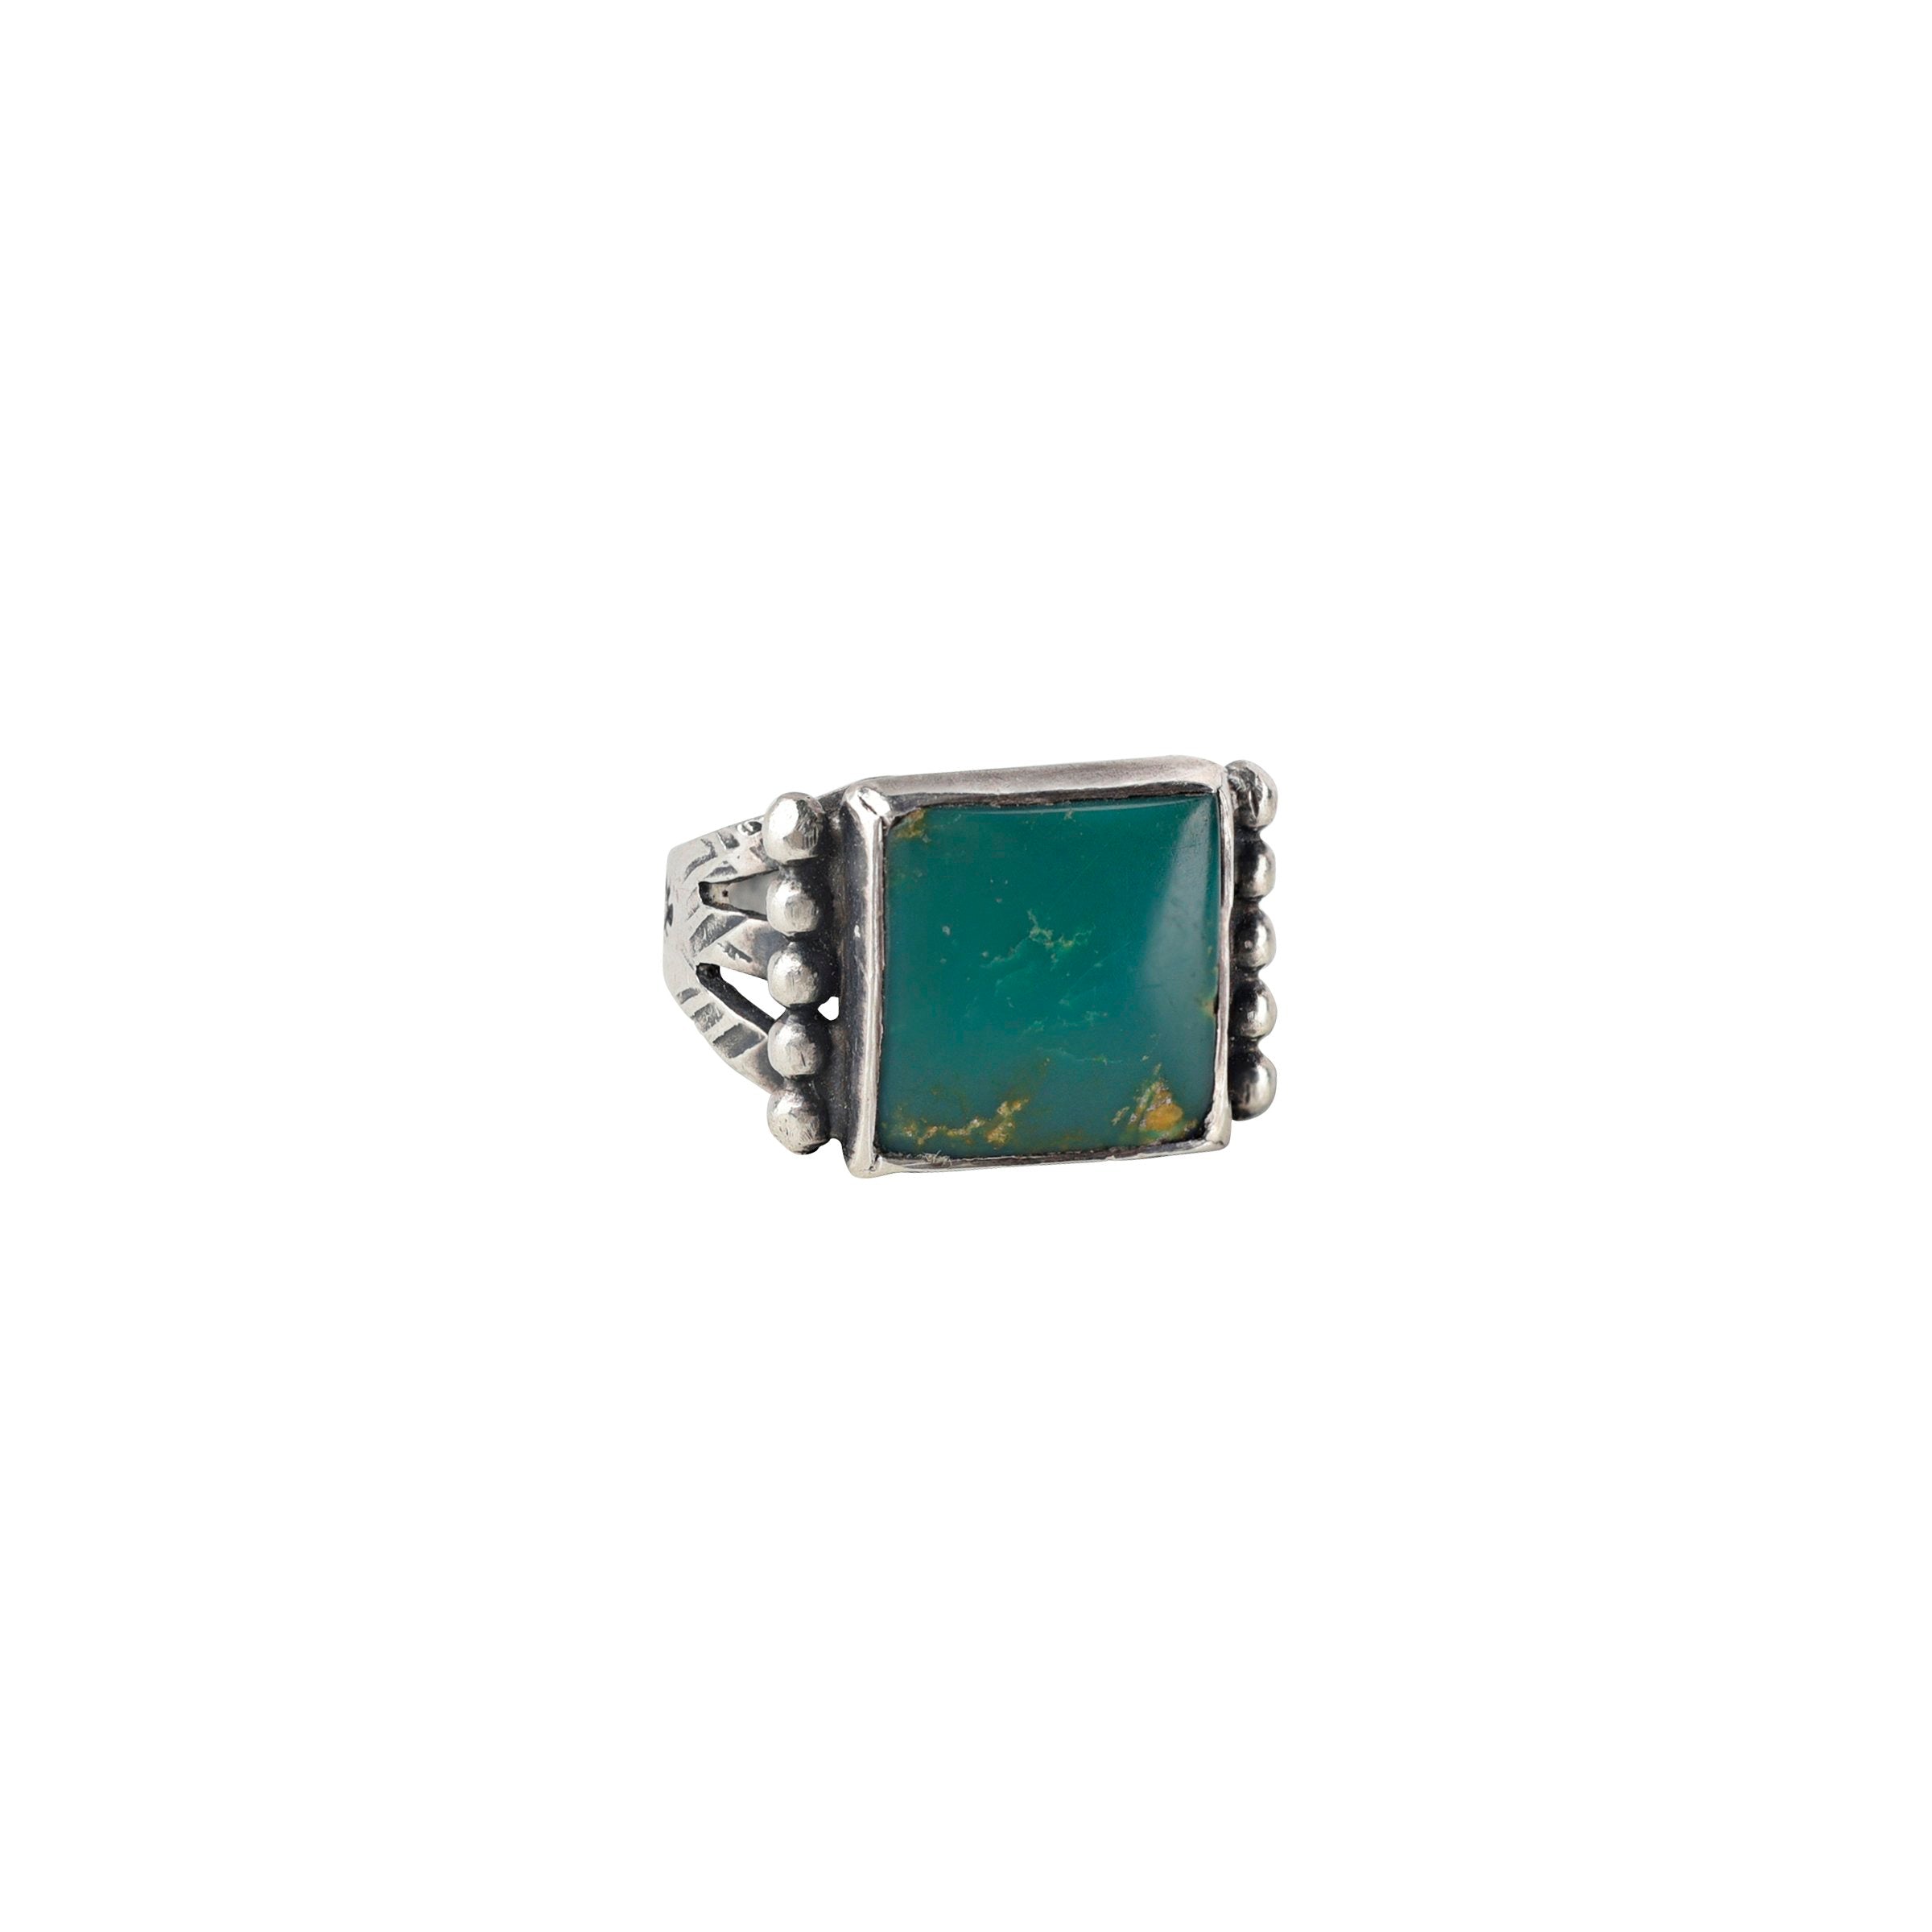 Vintage Cerillos Turquoise Ring - Size 8